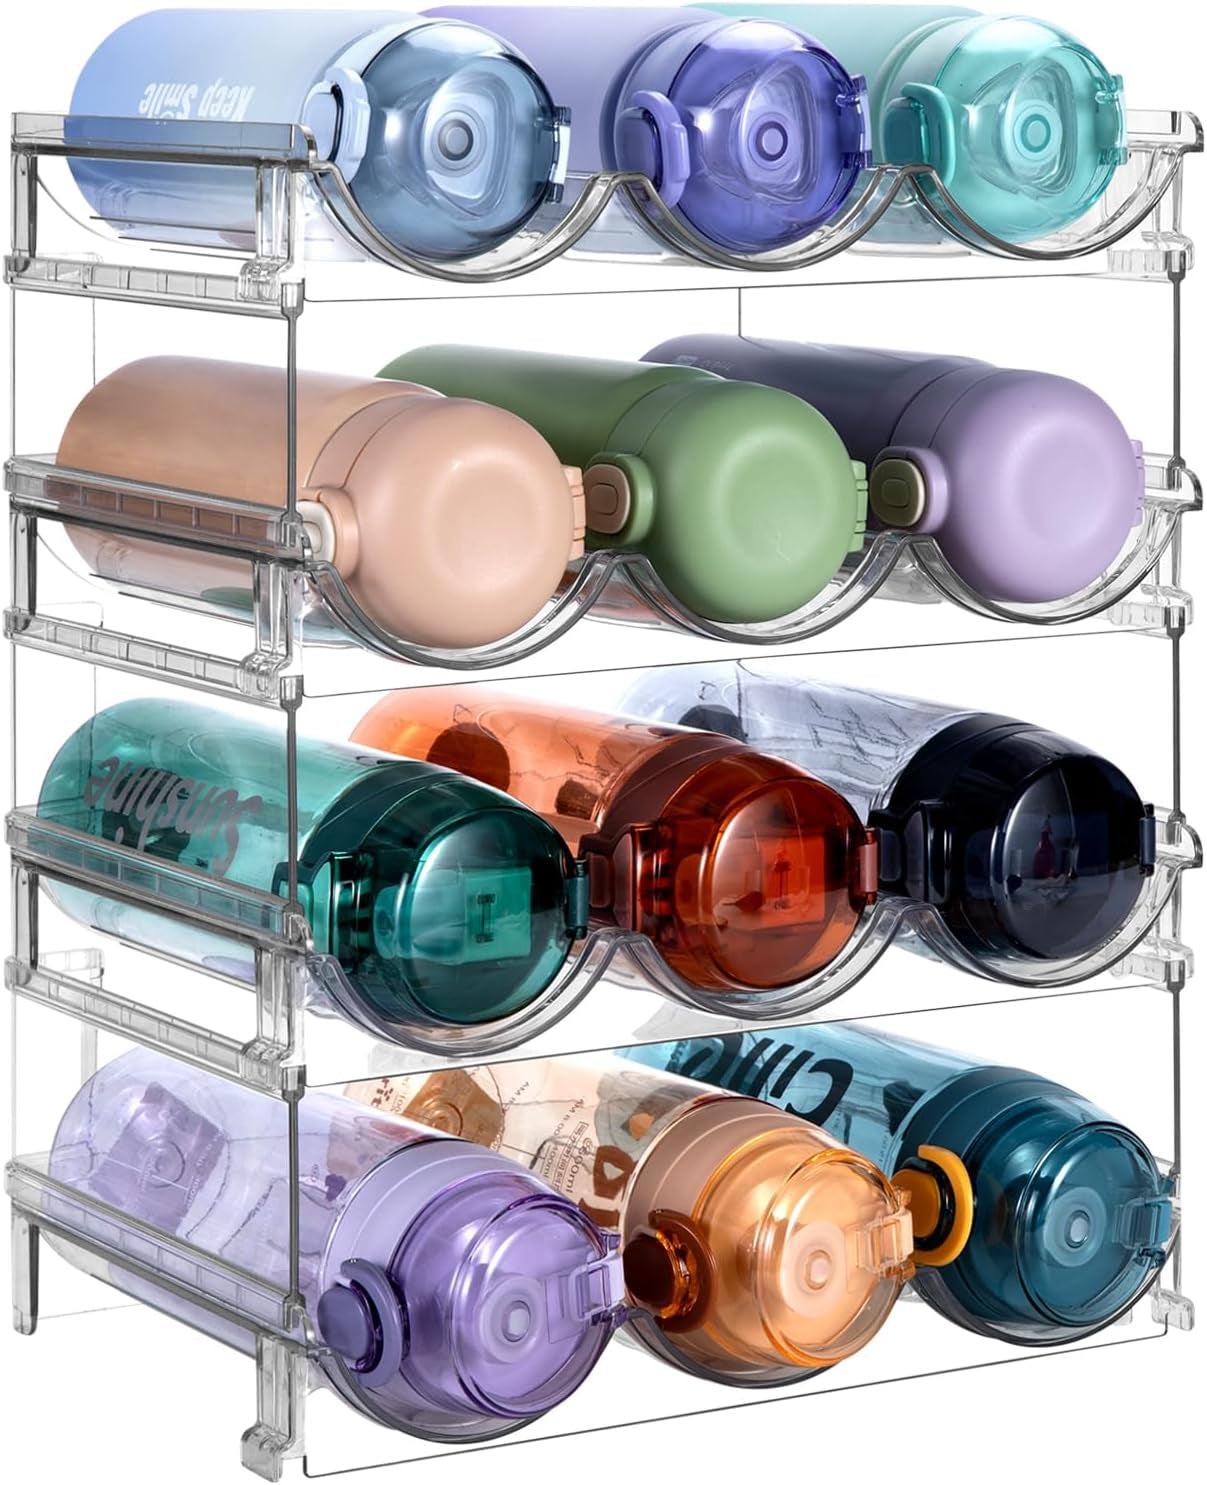  Stackable 4-Pack Water Bottle Organizer - Space Saving, Durable, Easy to Clean